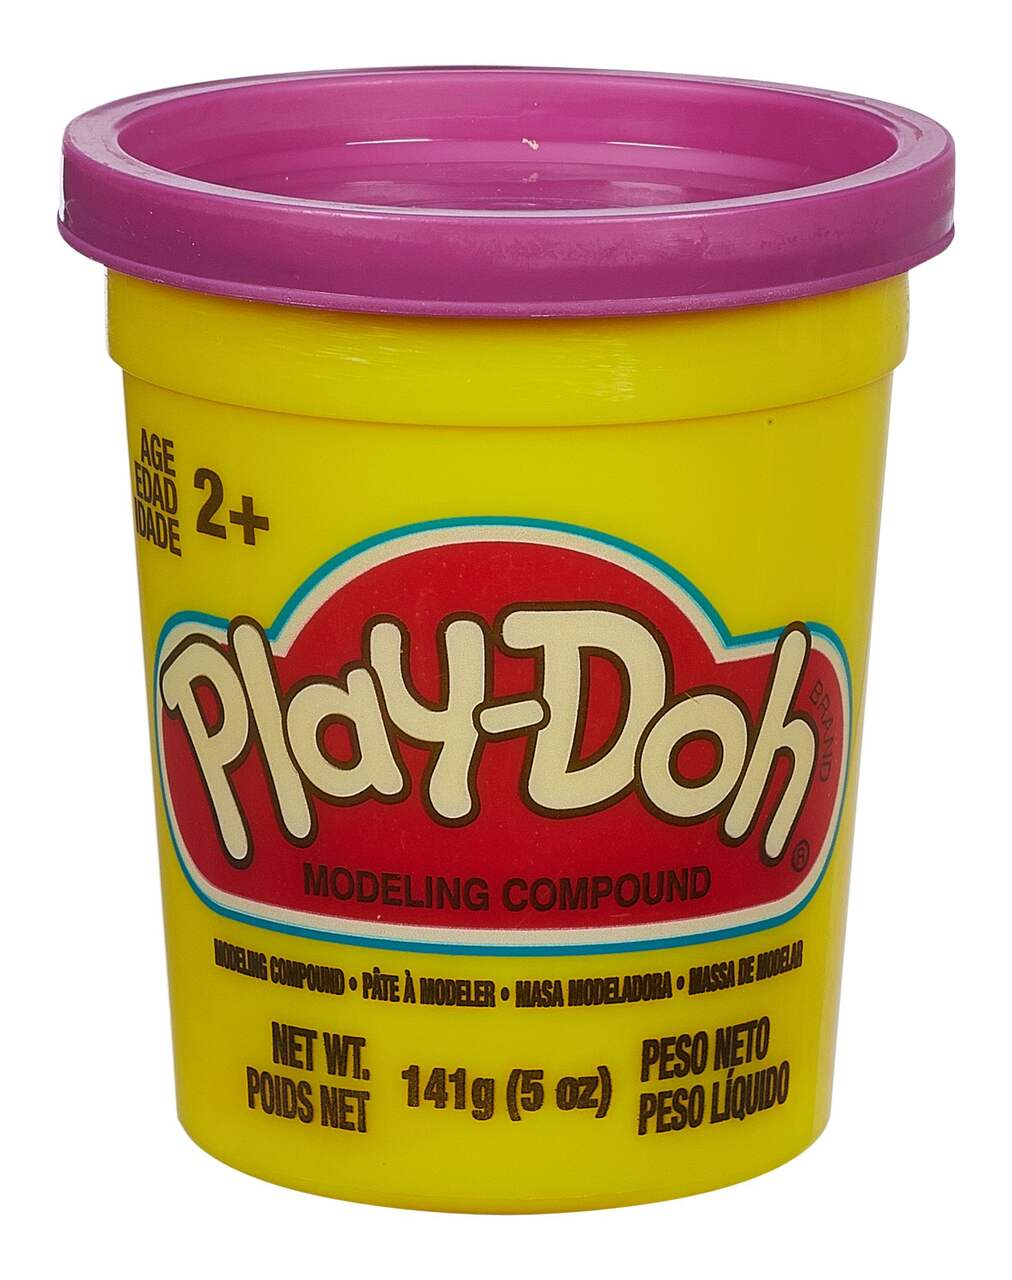 https://media-www.canadiantire.ca/product/seasonal-gardening/toys/preschool-toys-activities/0507789/-play-doh-single-can-345c1e18-ad51-432b-986a-8bc83382cb71-jpgrendition.jpg?imdensity=1&imwidth=640&impolicy=mZoom